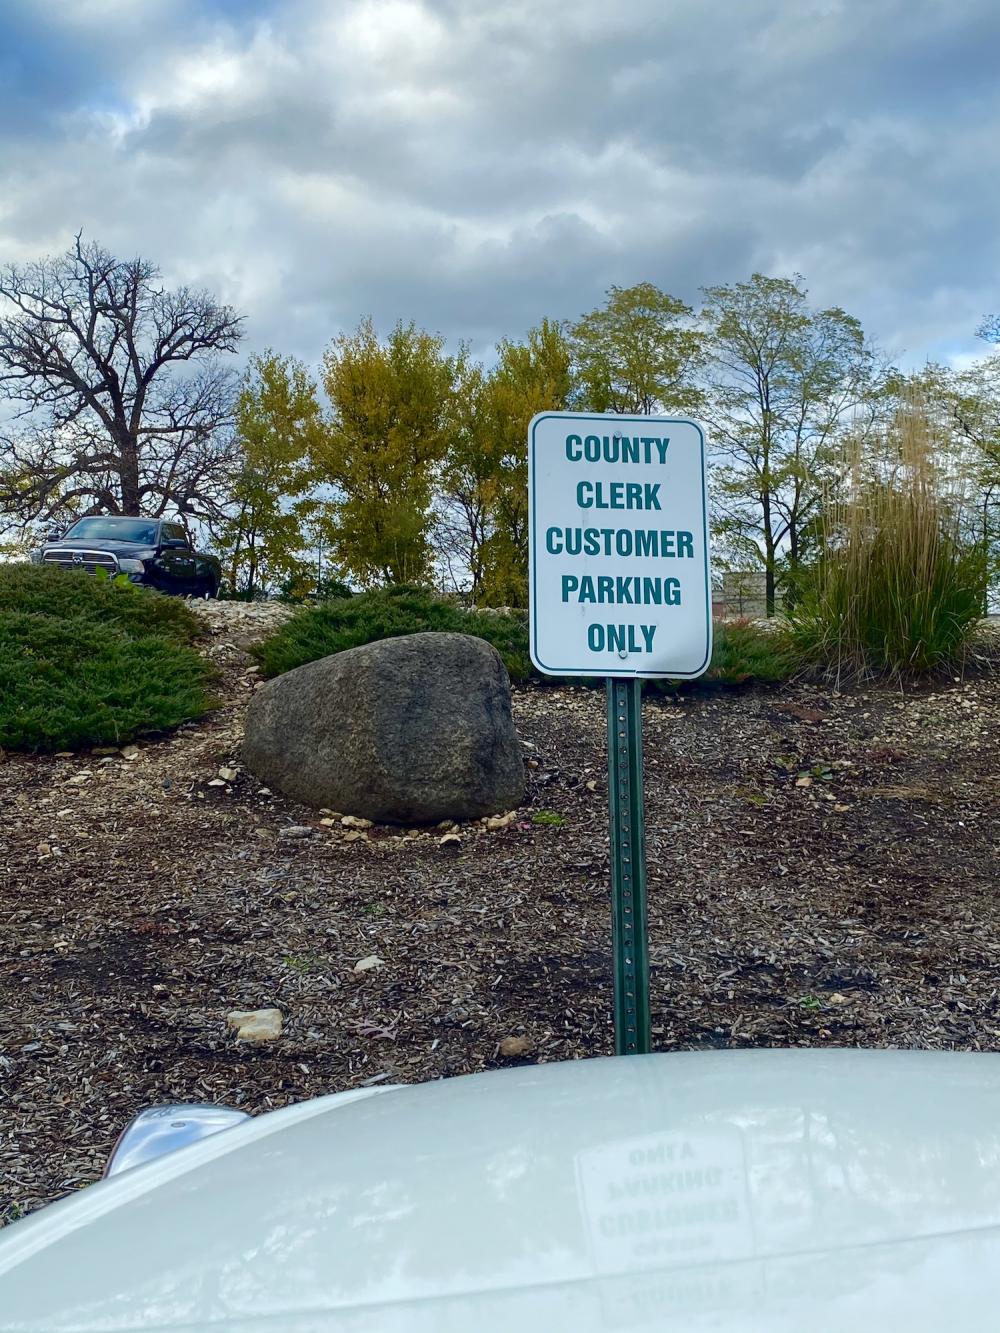 County Clerk Customer Parking Only